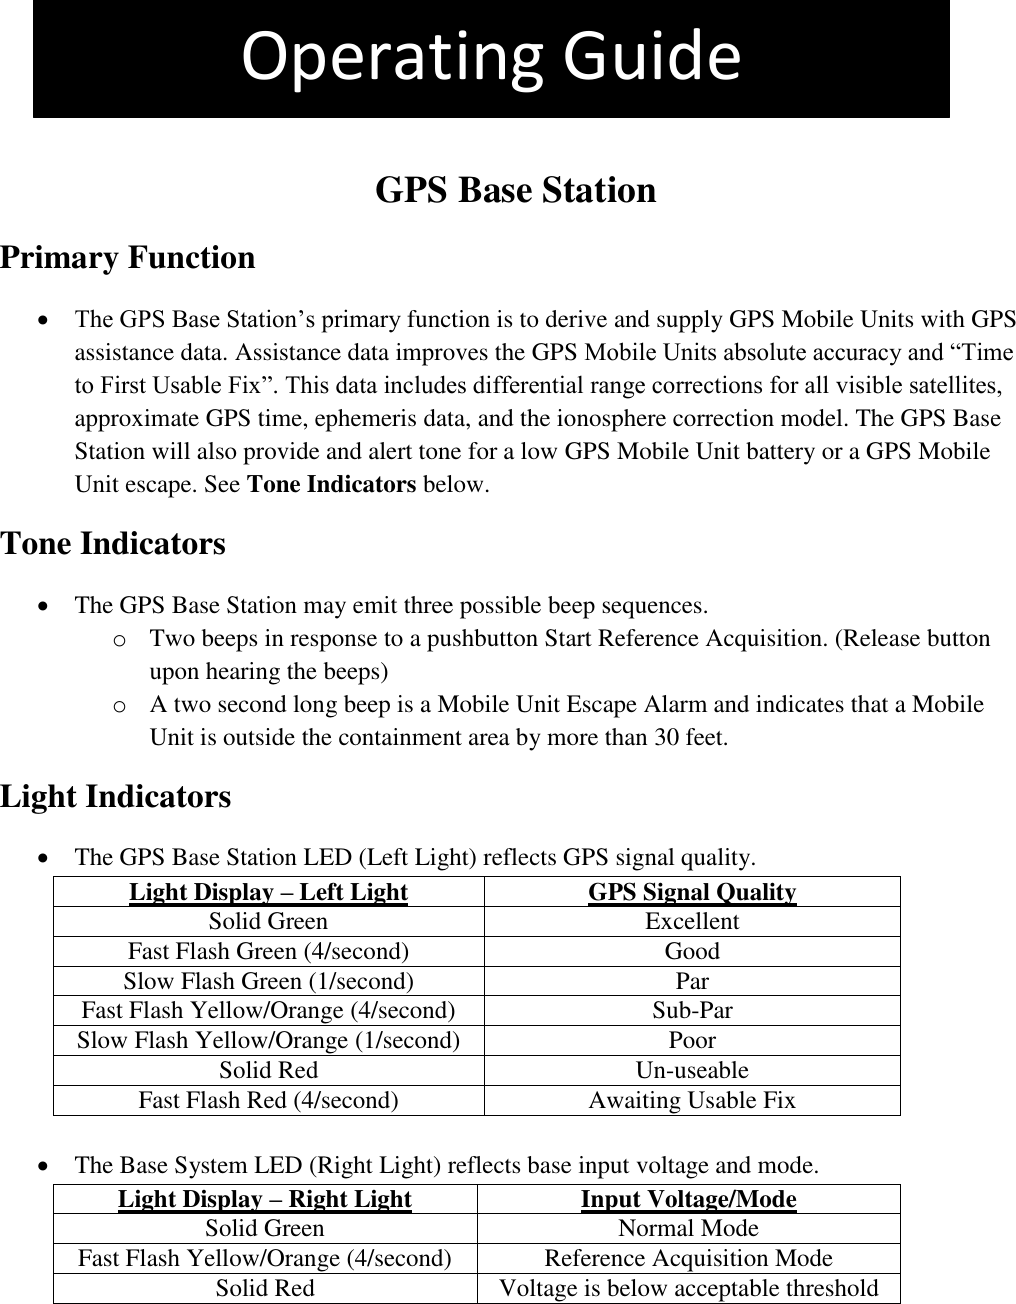 The pet is more than 4 feet outside the containment area. This is an Out +4 Violation   GPS Base Station Primary Function  The GPS Base Station’s primary function is to derive and supply GPS Mobile Units with GPS assistance data. Assistance data improves the GPS Mobile Units absolute accuracy and “Time to First Usable Fix”. This data includes differential range corrections for all visible satellites, approximate GPS time, ephemeris data, and the ionosphere correction model. The GPS Base Station will also provide and alert tone for a low GPS Mobile Unit battery or a GPS Mobile Unit escape. See Tone Indicators below. Tone Indicators  The GPS Base Station may emit three possible beep sequences. o Two beeps in response to a pushbutton Start Reference Acquisition. (Release button upon hearing the beeps) o A two second long beep is a Mobile Unit Escape Alarm and indicates that a Mobile Unit is outside the containment area by more than 30 feet.  Light Indicators   The GPS Base Station LED (Left Light) reflects GPS signal quality. Light Display – Left Light GPS Signal Quality Solid Green Excellent Fast Flash Green (4/second) Good Slow Flash Green (1/second) Par Fast Flash Yellow/Orange (4/second) Sub-Par Slow Flash Yellow/Orange (1/second) Poor Solid Red Un-useable Fast Flash Red (4/second) Awaiting Usable Fix     The Base System LED (Right Light) reflects base input voltage and mode. Light Display – Right Light Input Voltage/Mode Solid Green Normal Mode Fast Flash Yellow/Orange (4/second) Reference Acquisition Mode Solid Red Voltage is below acceptable threshold    Operating Guide 